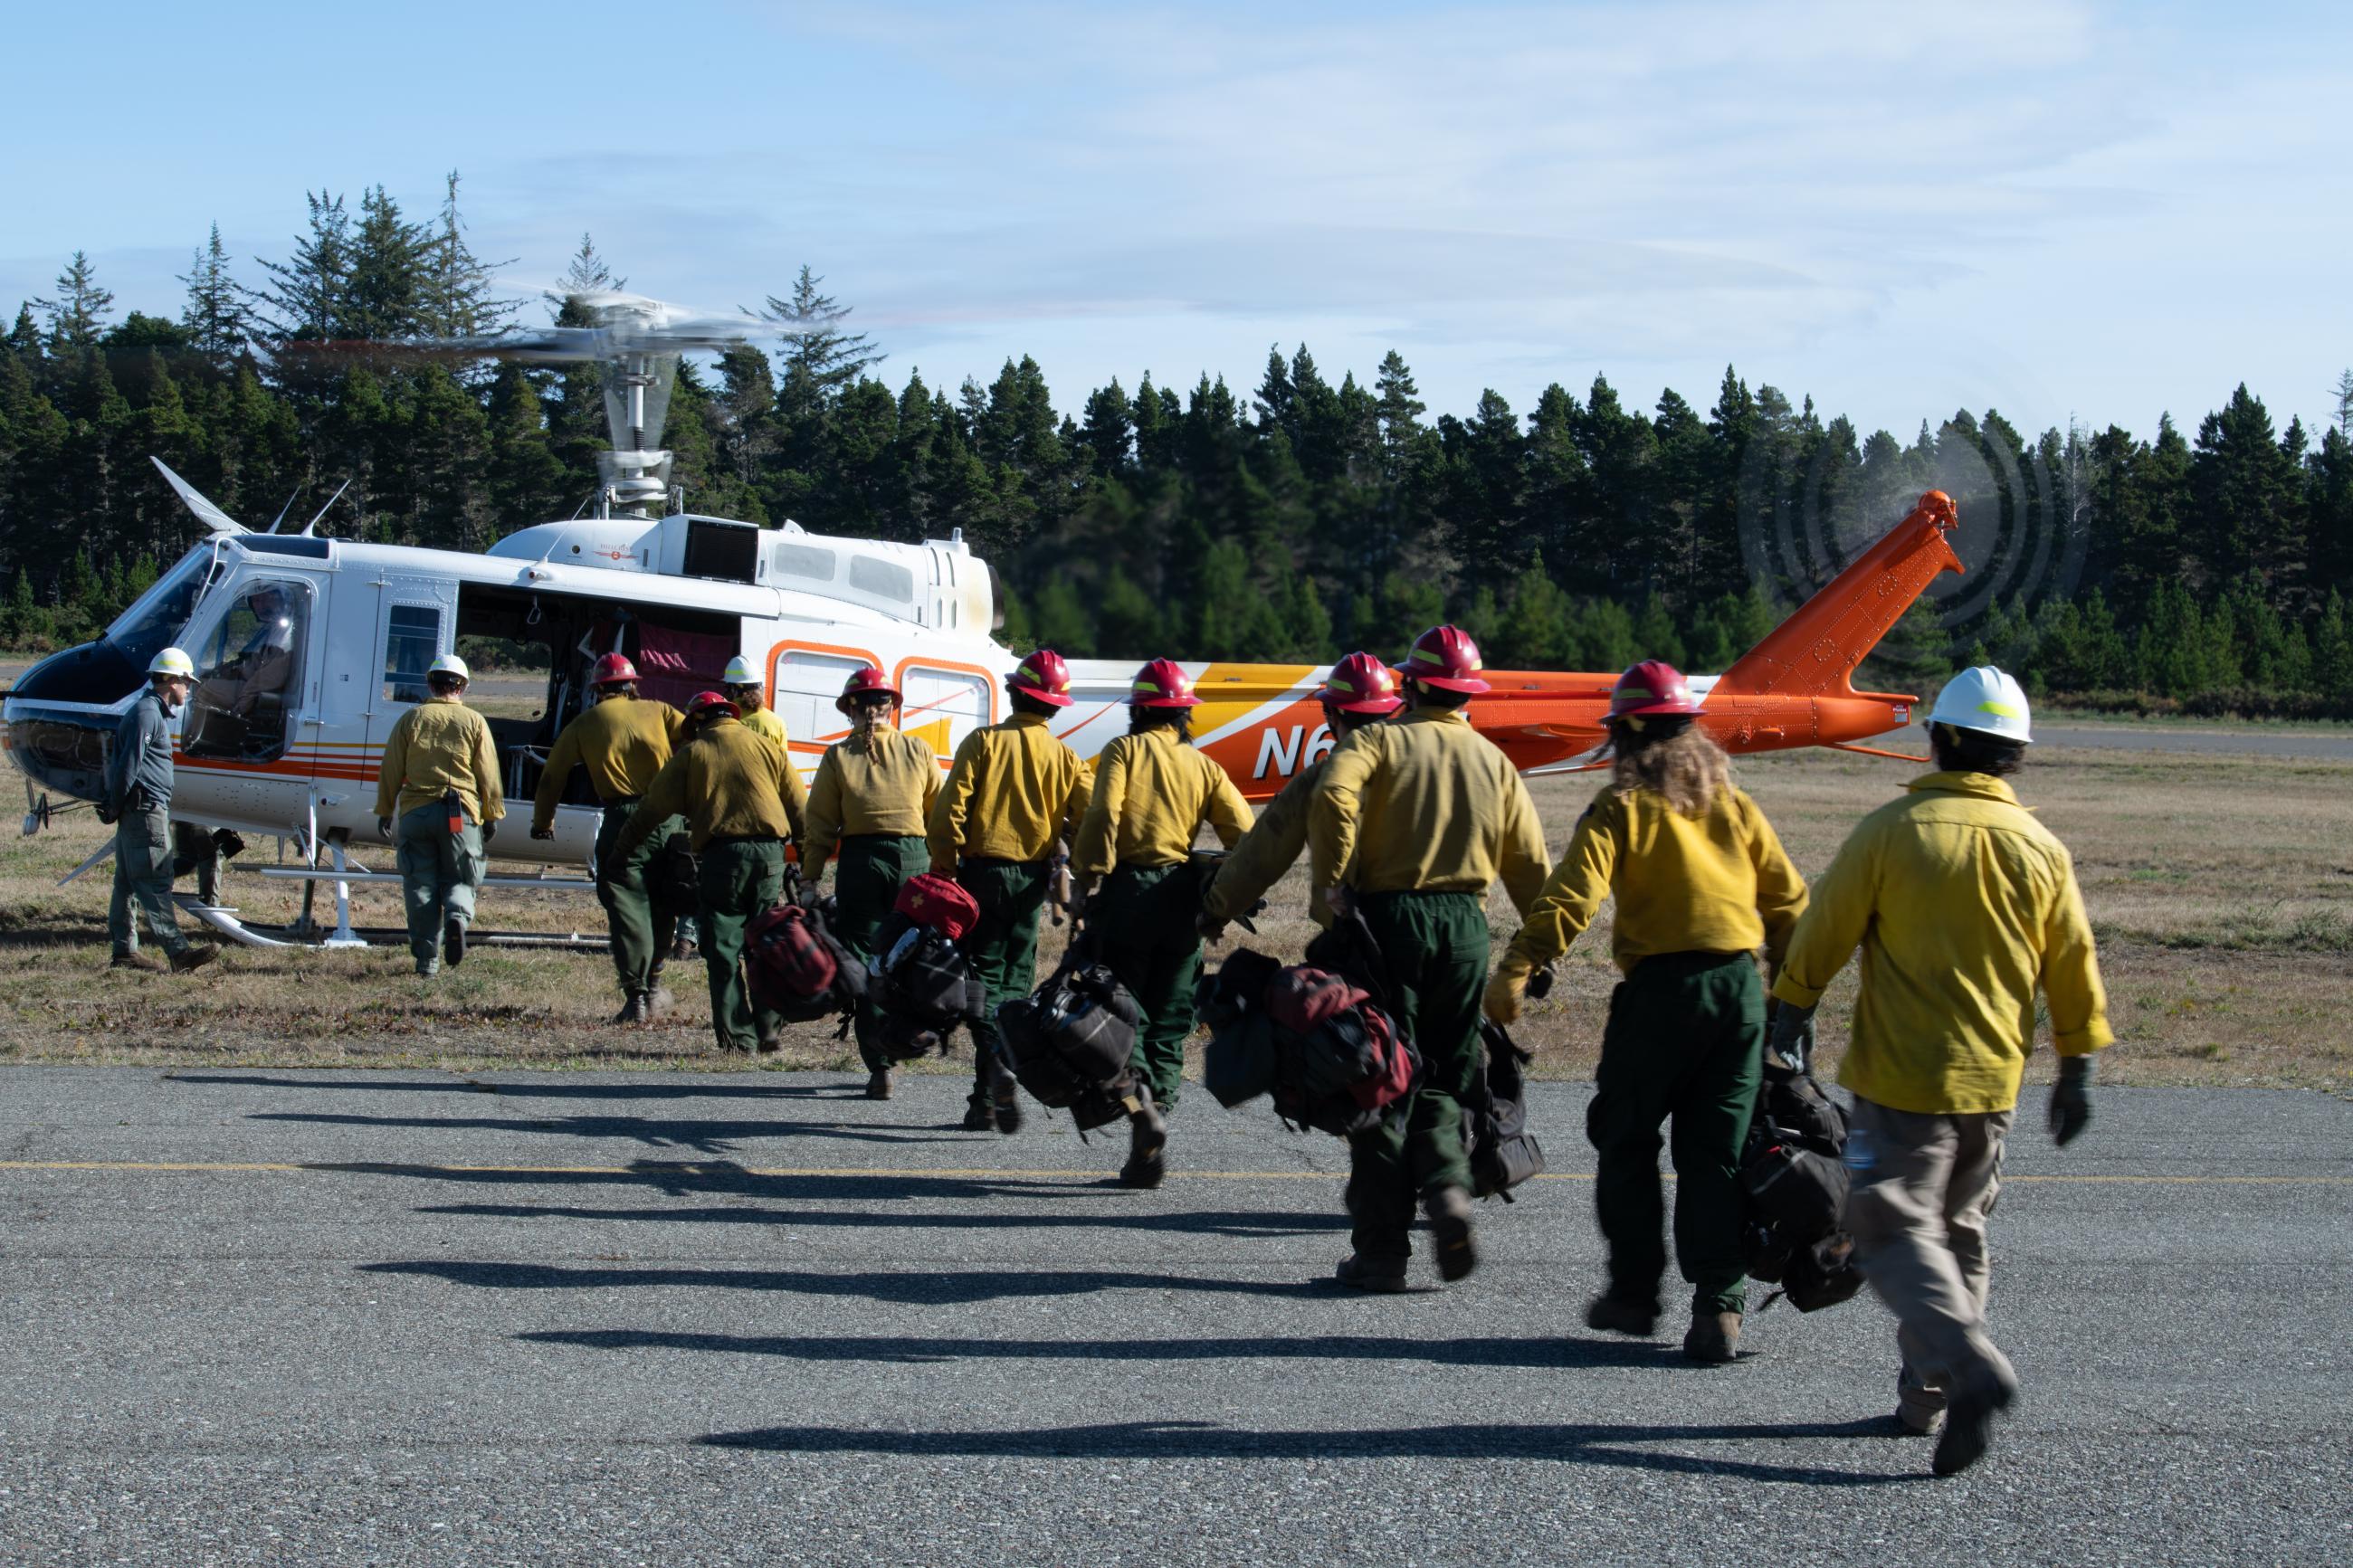 firefighters walk in a line towards a helicopter and carrying bags